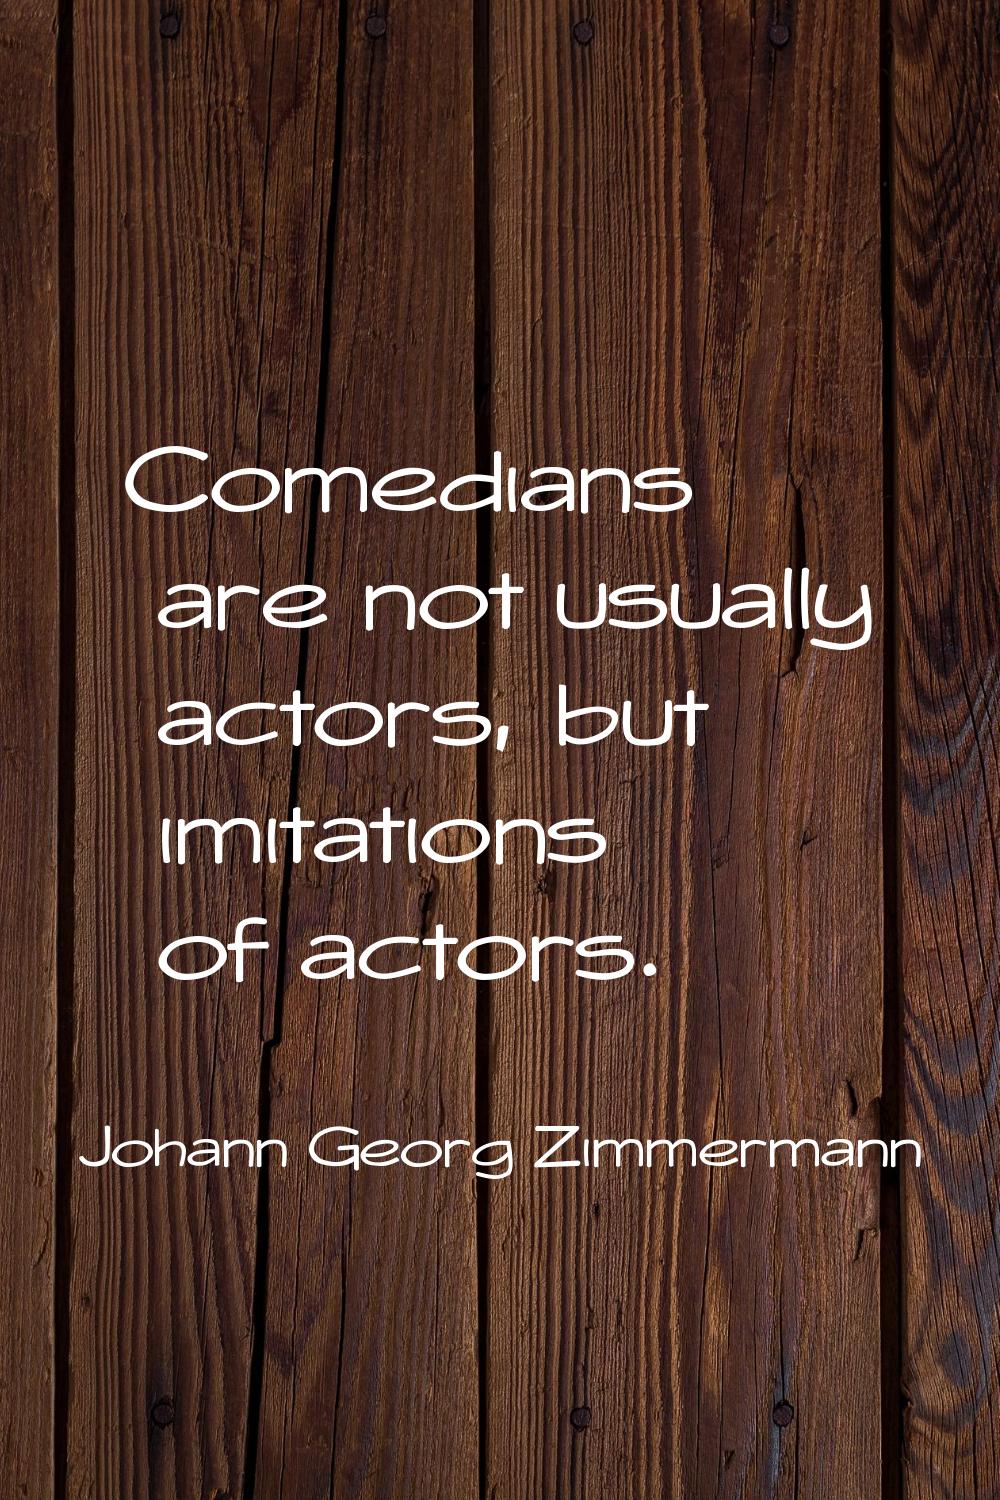 Comedians are not usually actors, but imitations of actors.